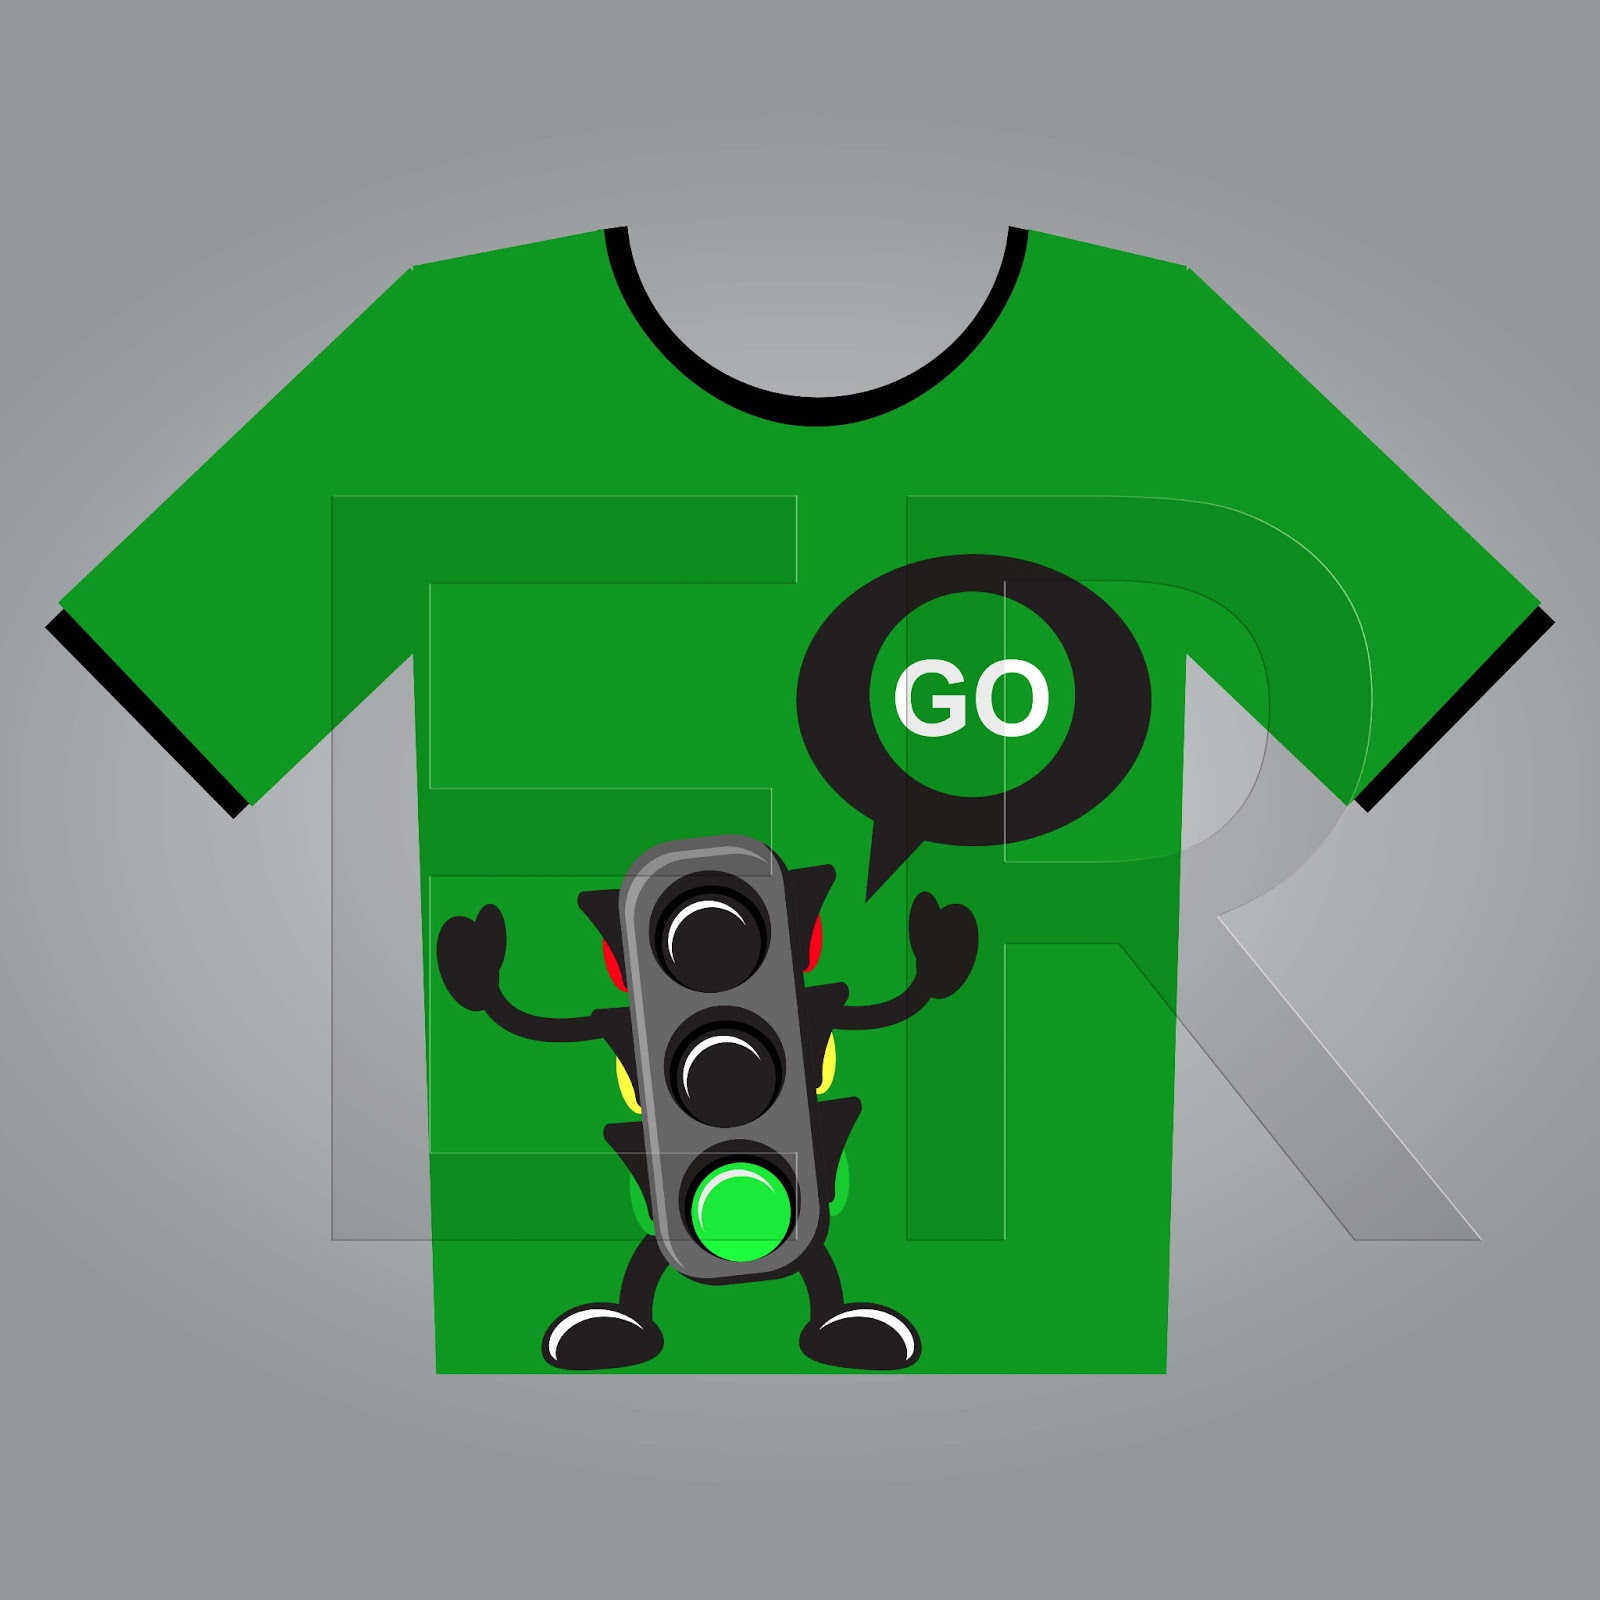 Download Vector In Graphic: Download My 10 Funny T-Shirt Design FREE!!!